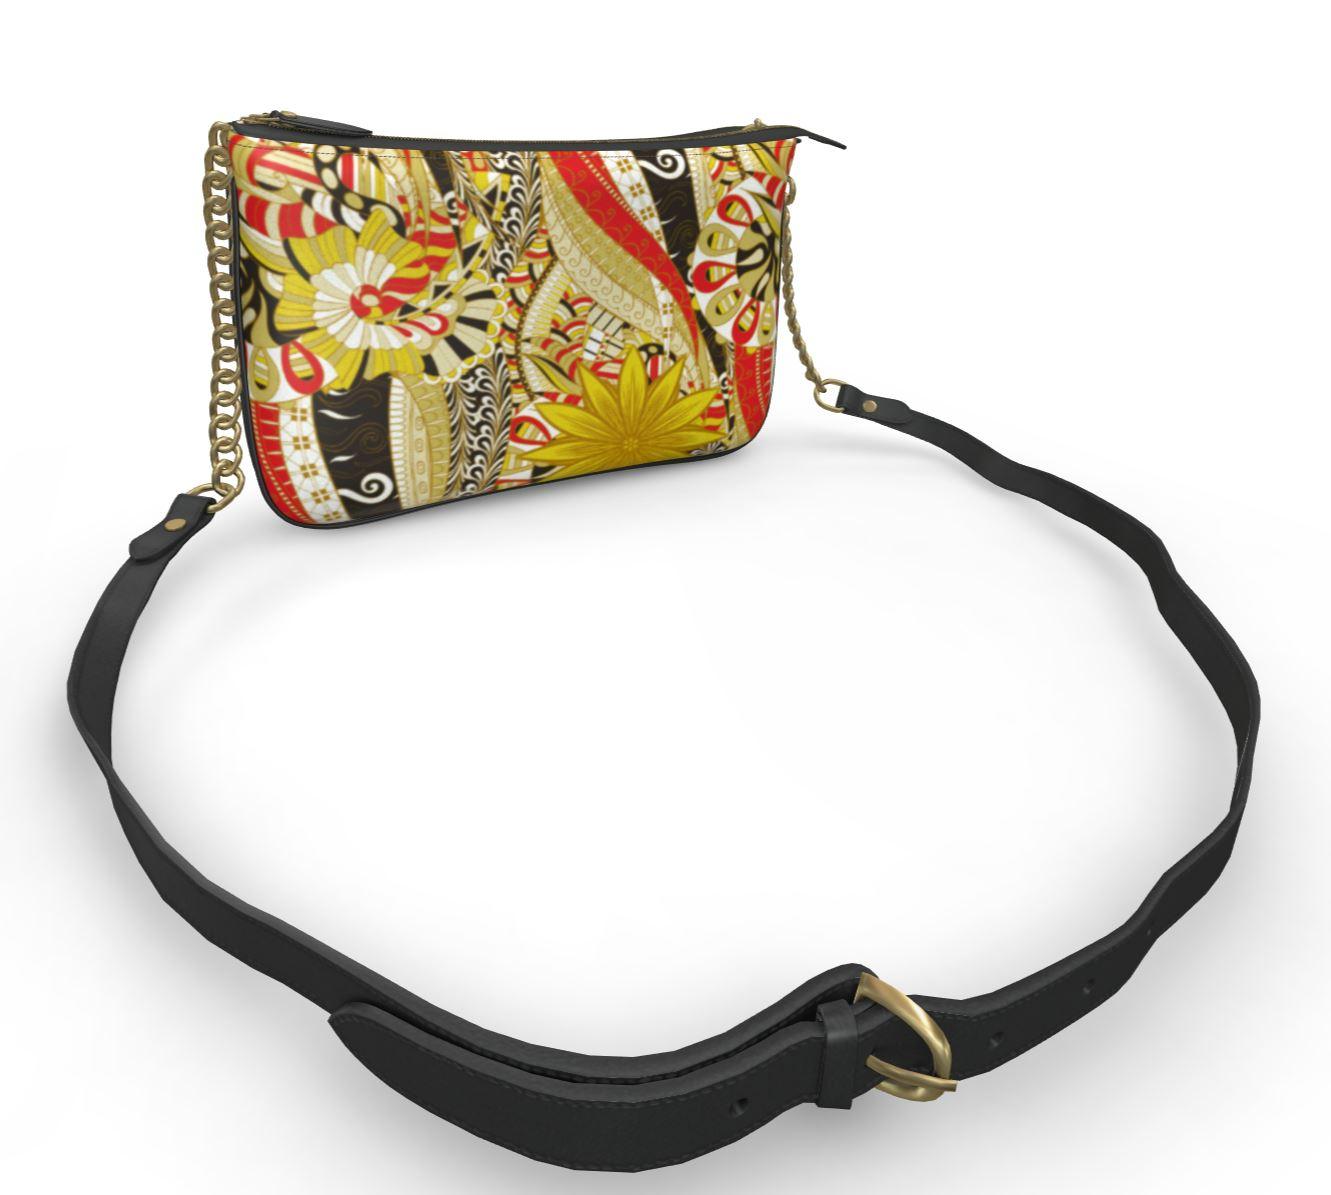 Merina Leather Pochette Bag - Baroque & Abstract Floral Print | Blissfully Brand